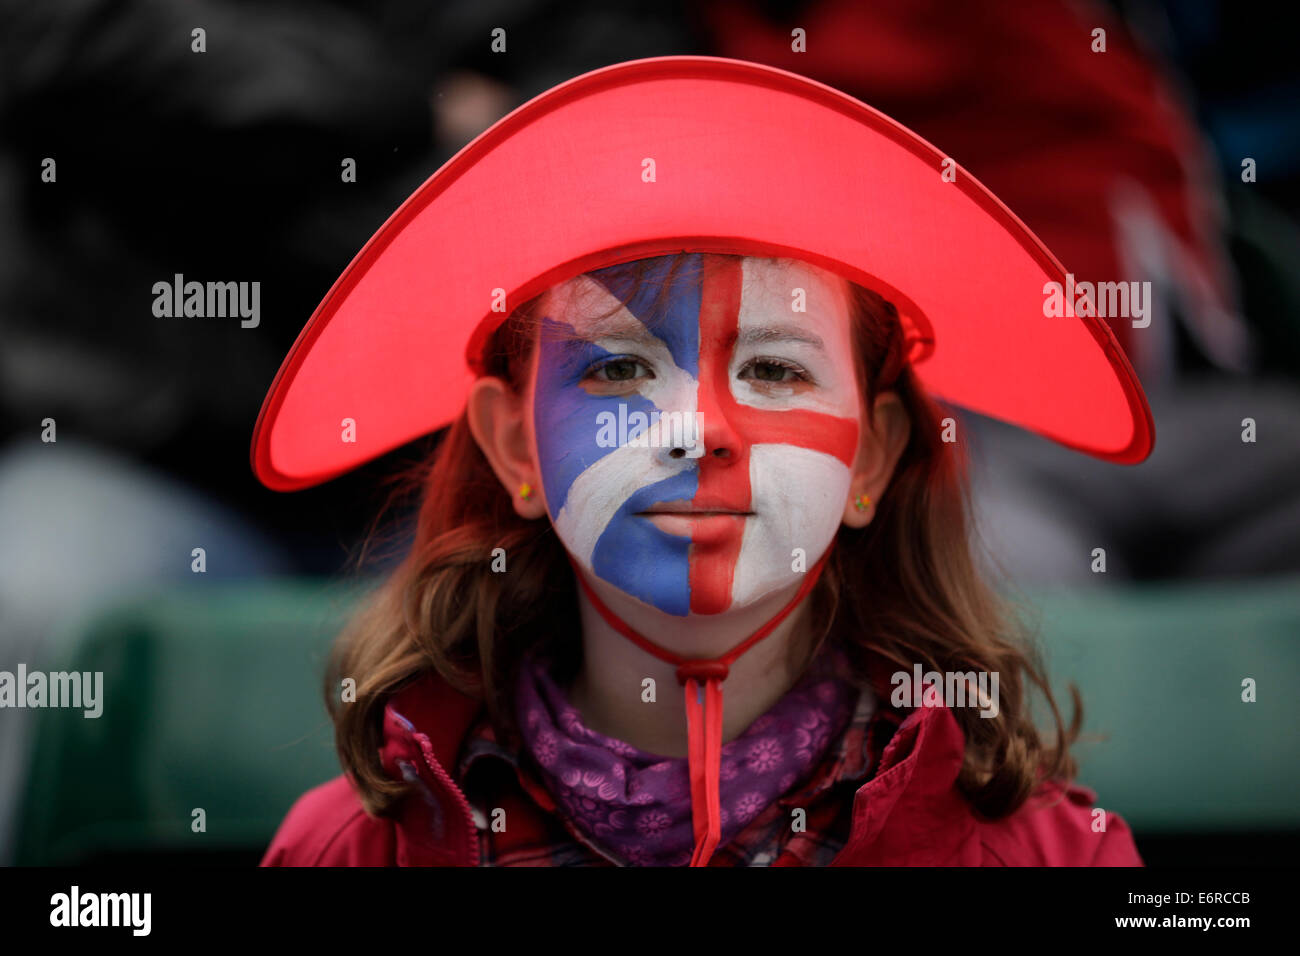 Little girl with face painted with Scottish flag and English flag Stock Photo